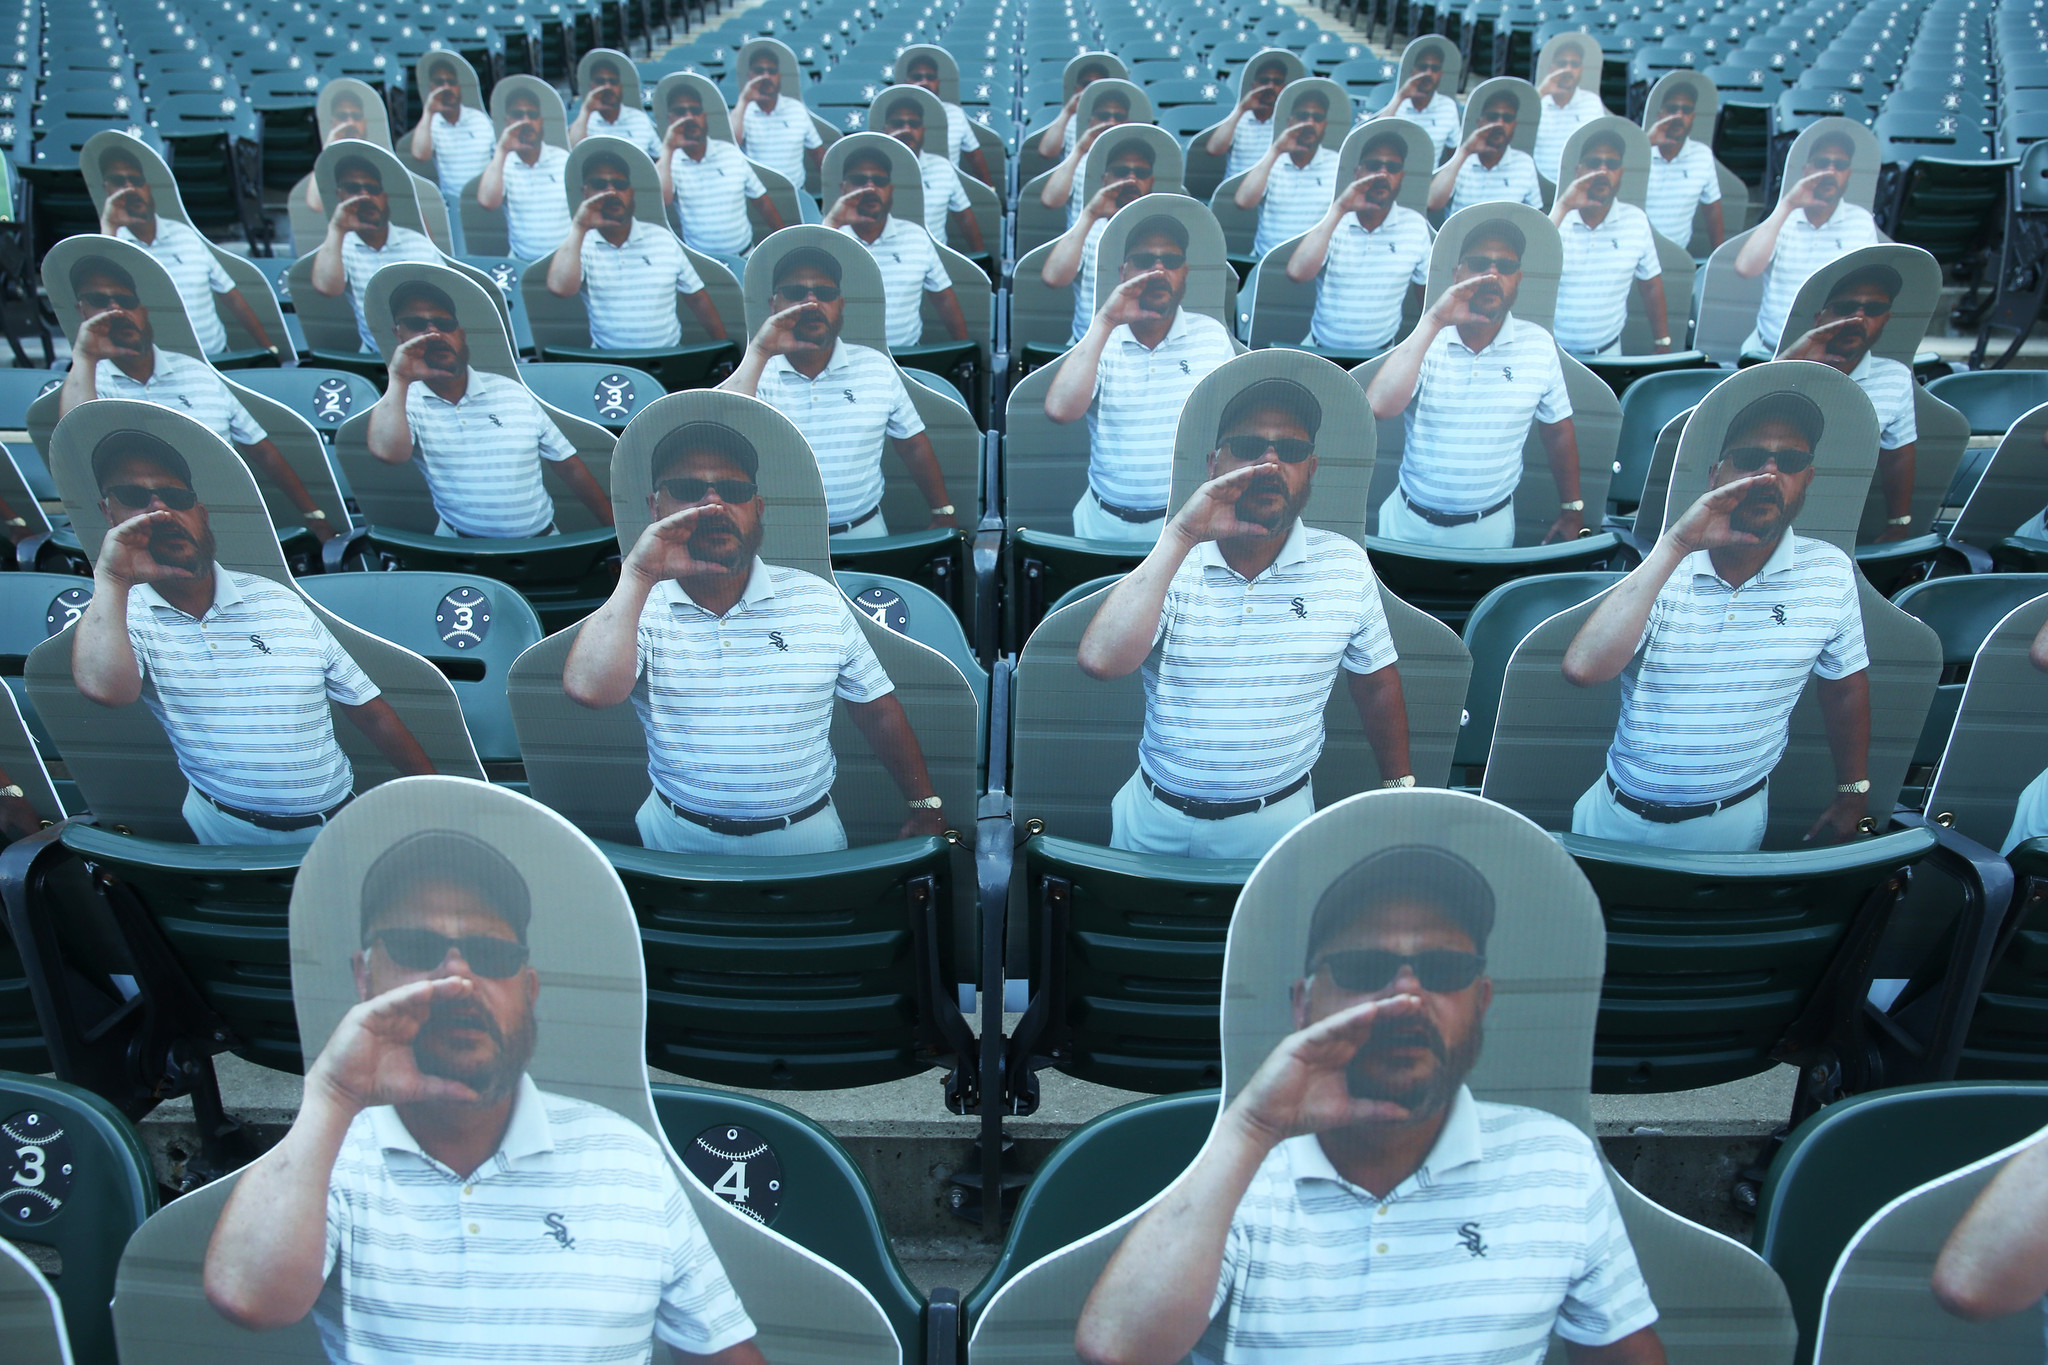 The Recorder - Faces in the crowd: Cutouts provide virtual MLB audience